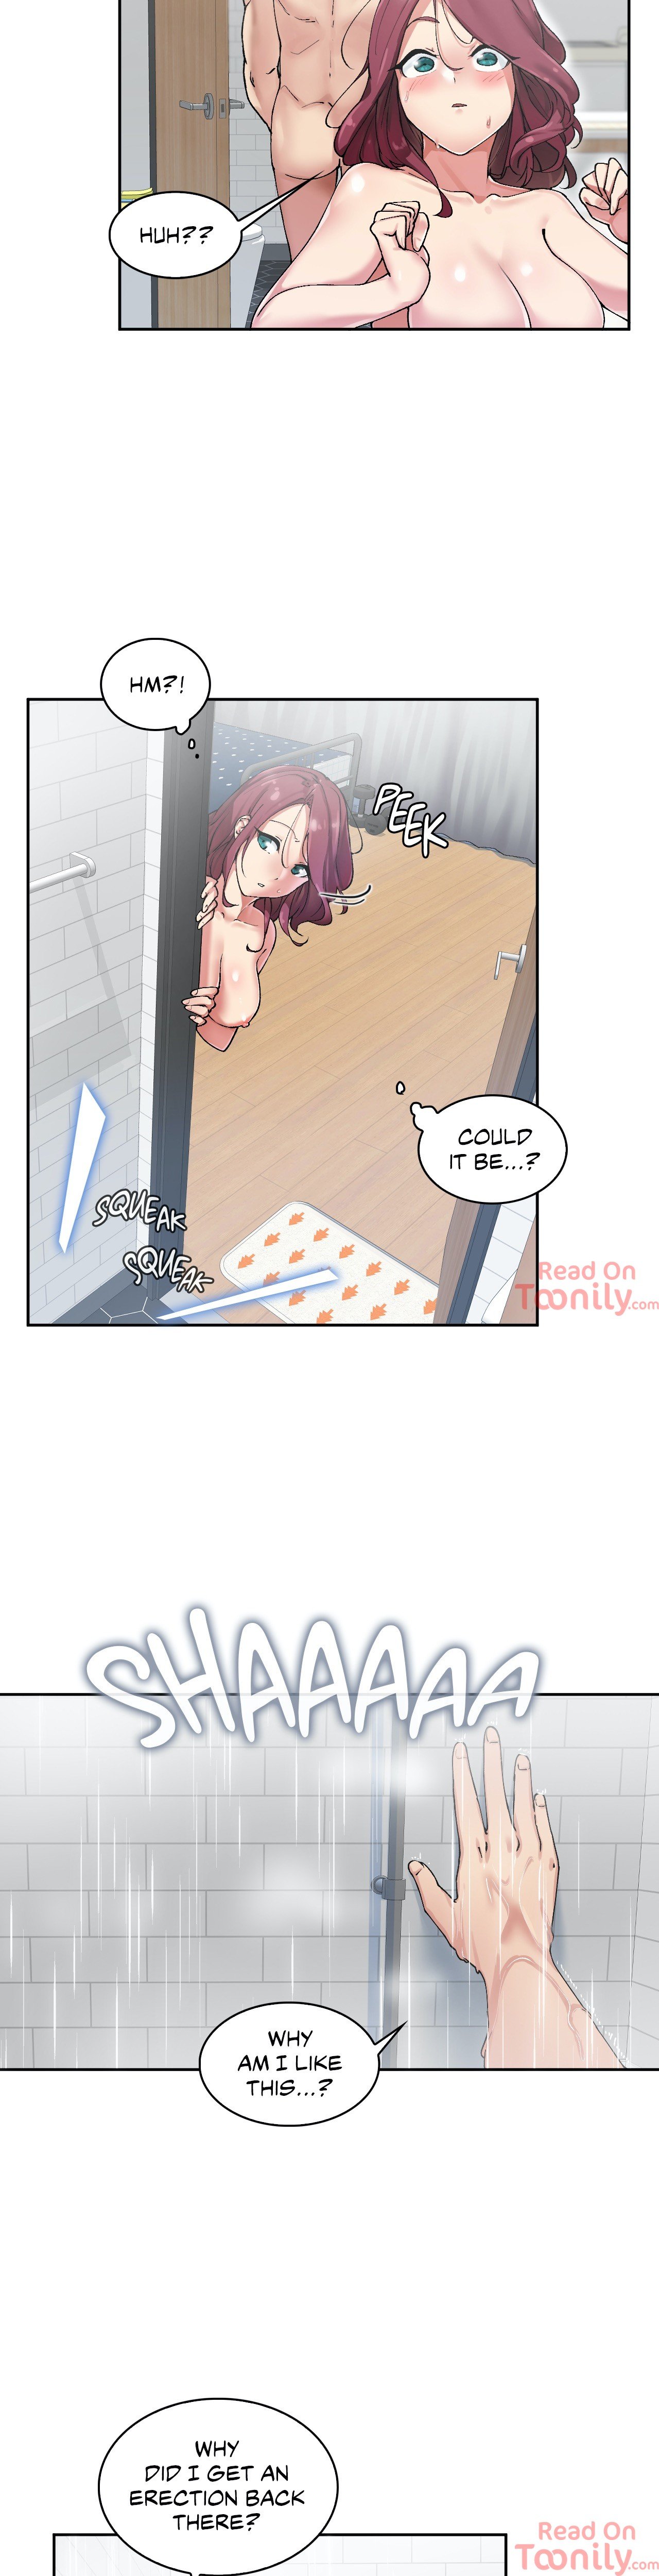 The Girl Hiding in the Wall - Chapter 6 Page 3